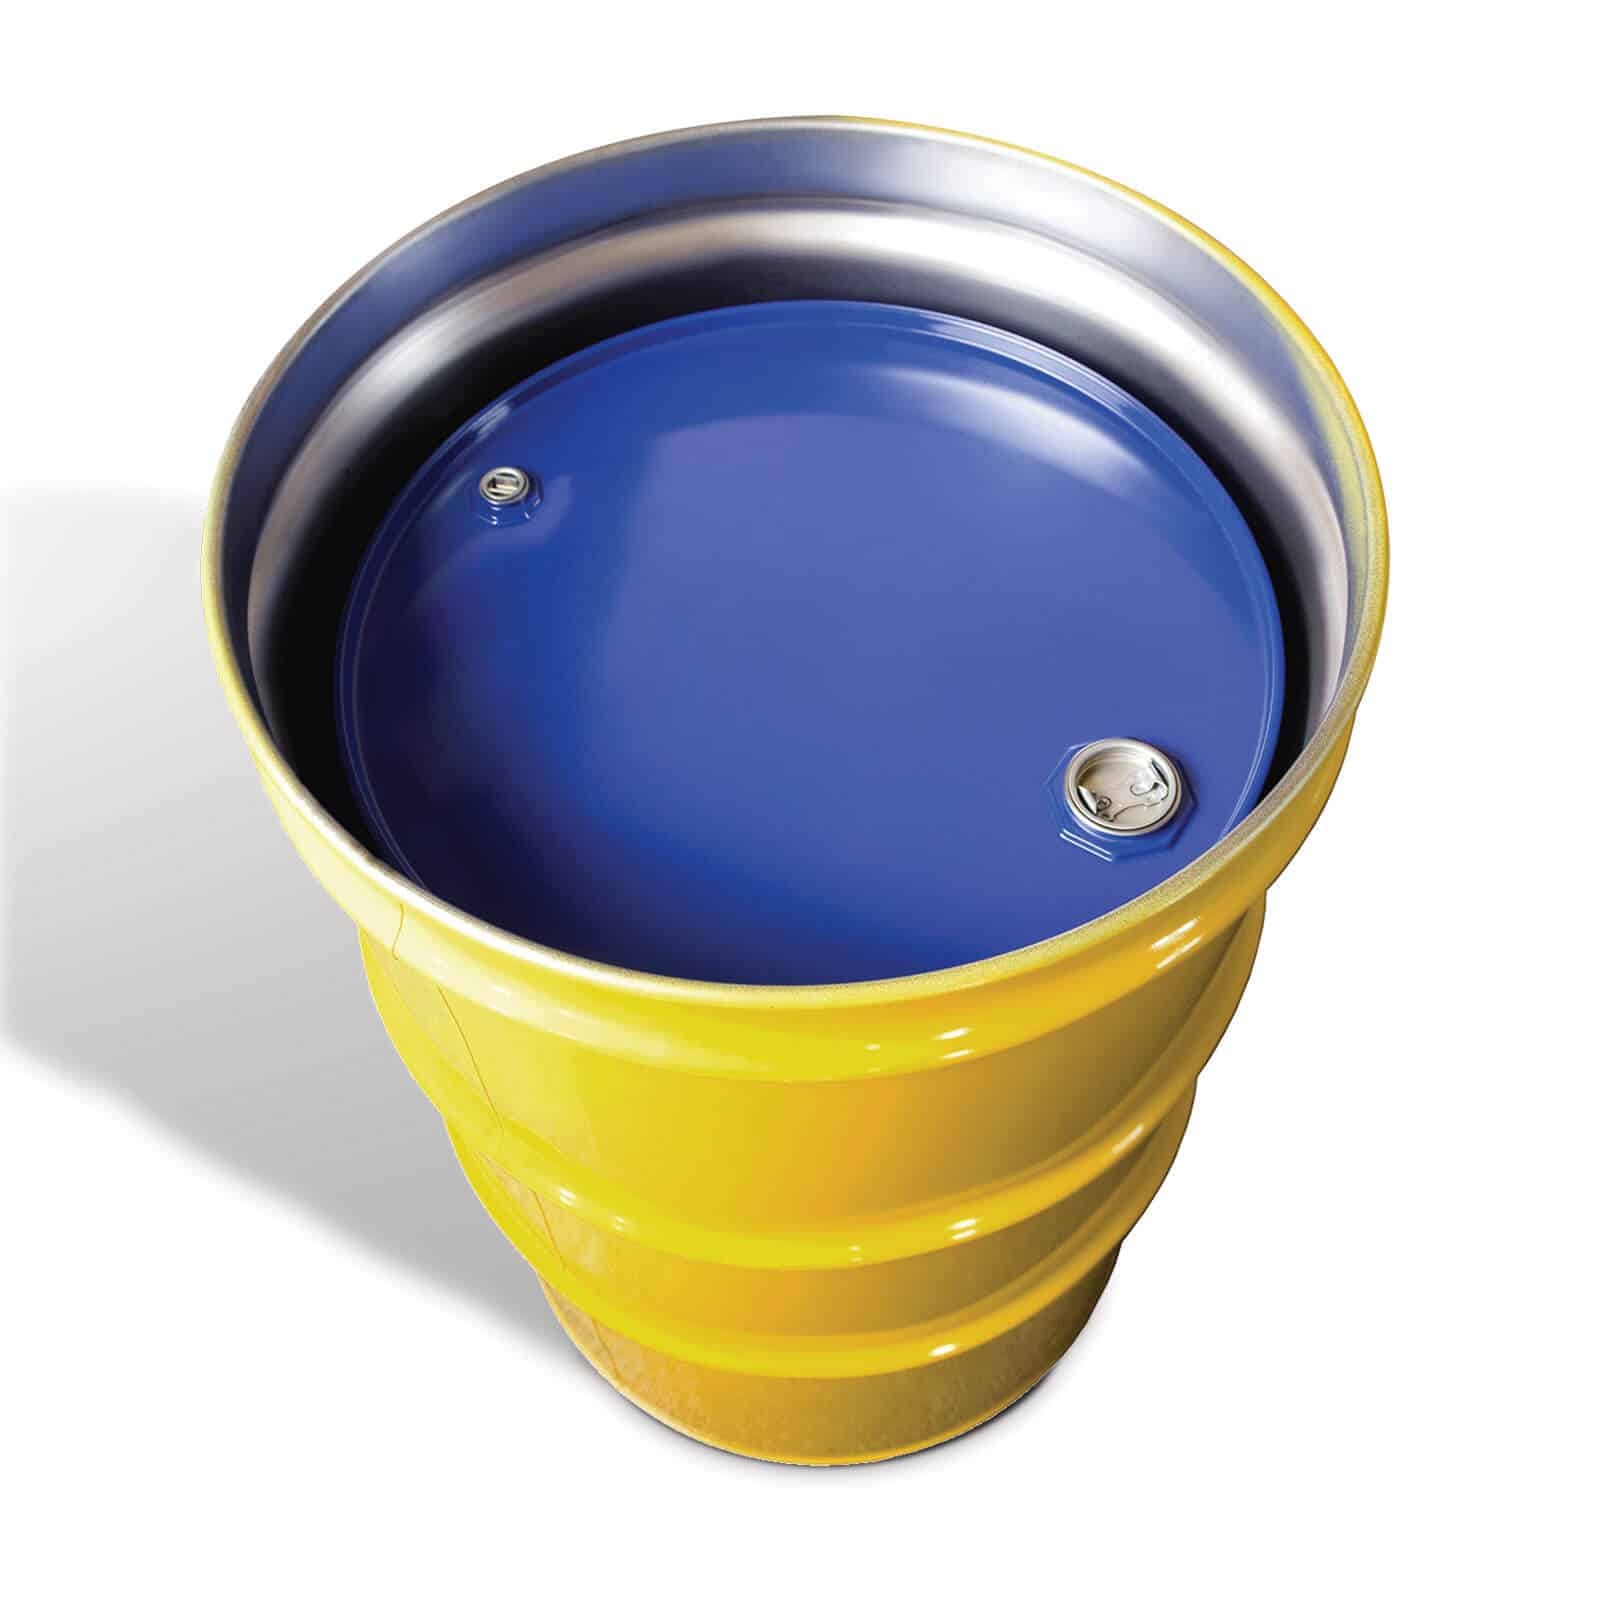 greif salvage drum from the inside. Salvage drum is a yellow steel drum designed to encase a leaking barrel of plastic, steel, or other material to contain leakage